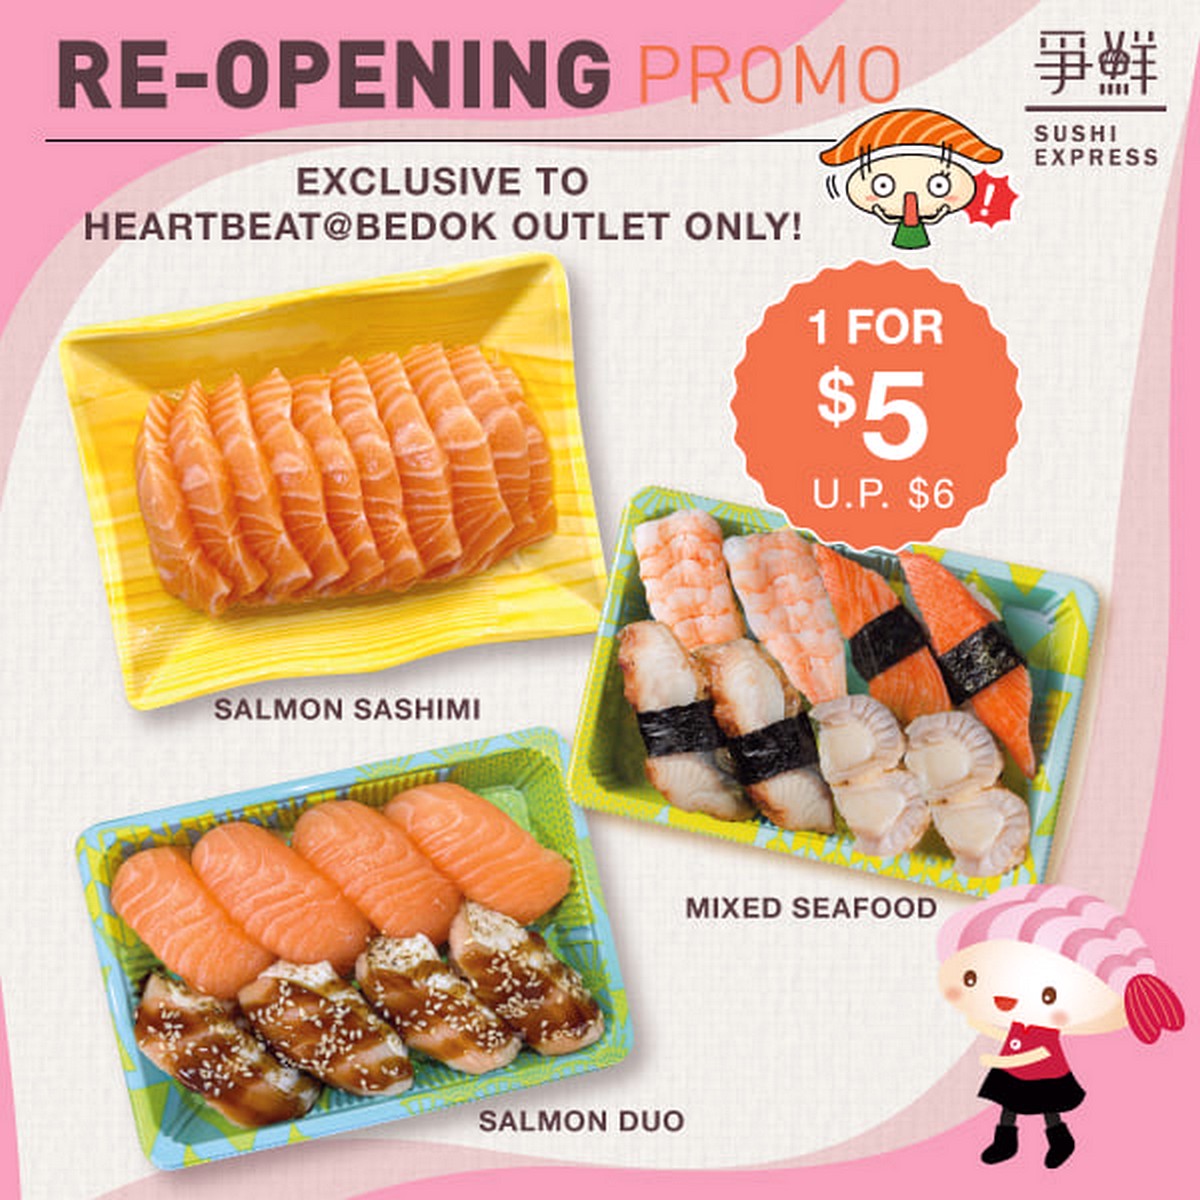 Sushi-Express-FREE-1-Plate-of-Sushi-2021-Singapore-Japanese-Food-Promotion-003 19-23 Apr 2021: Sushi Express Re-Opening Special Promotion at Heartbeat @ Bedok